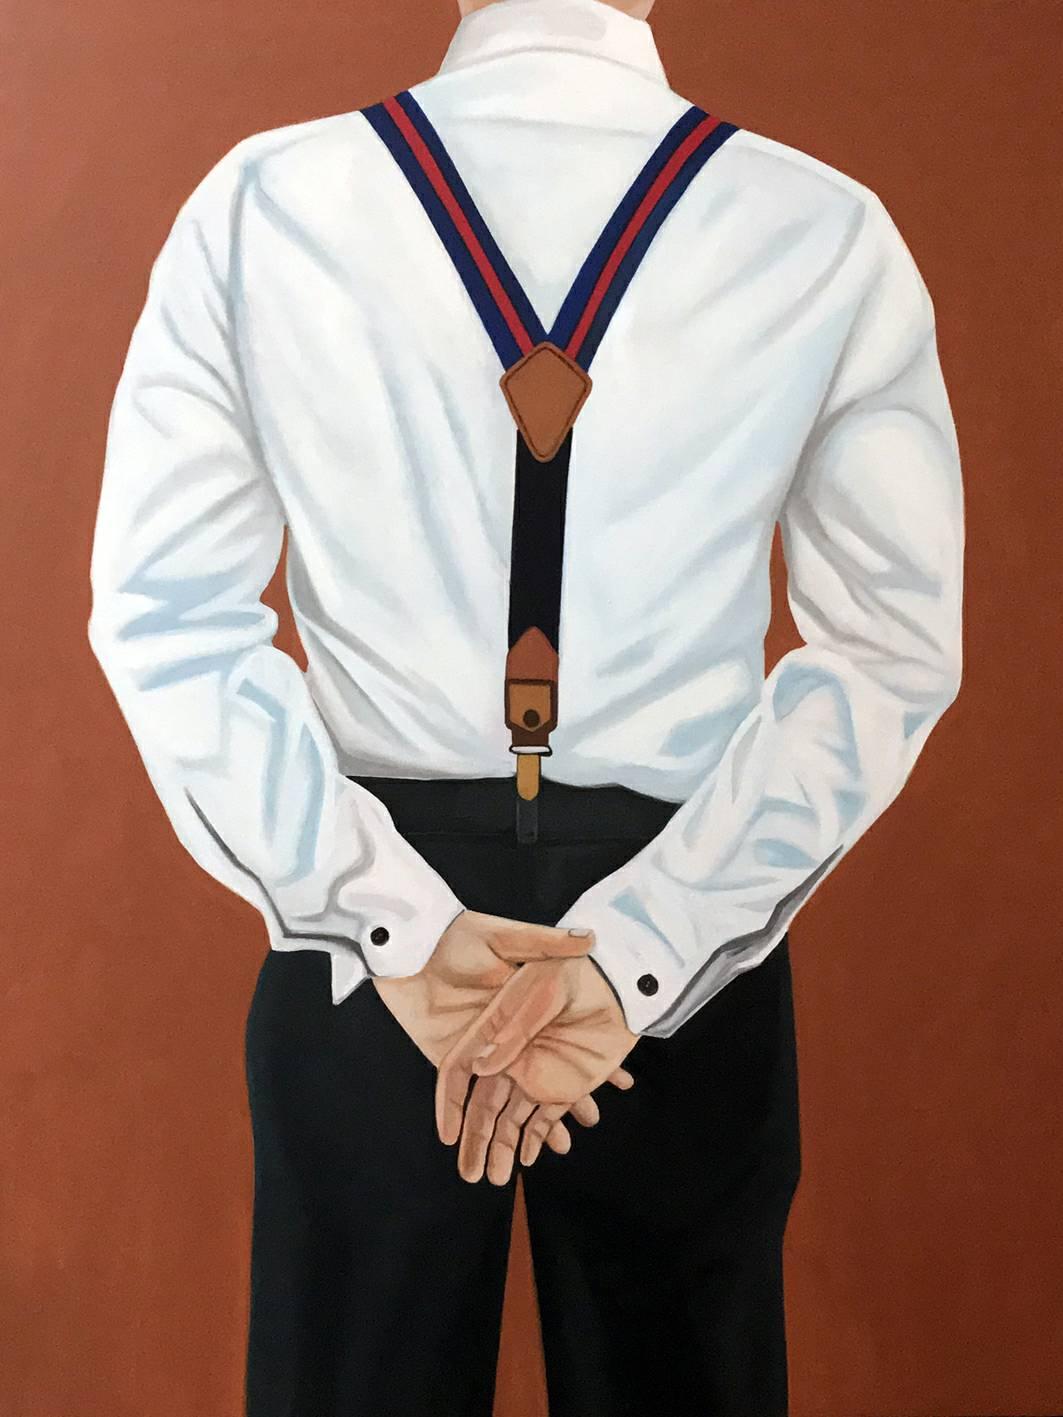 Self Portrait with Suspenders, Oil on canvas, 120 x 90 cm, 2019 